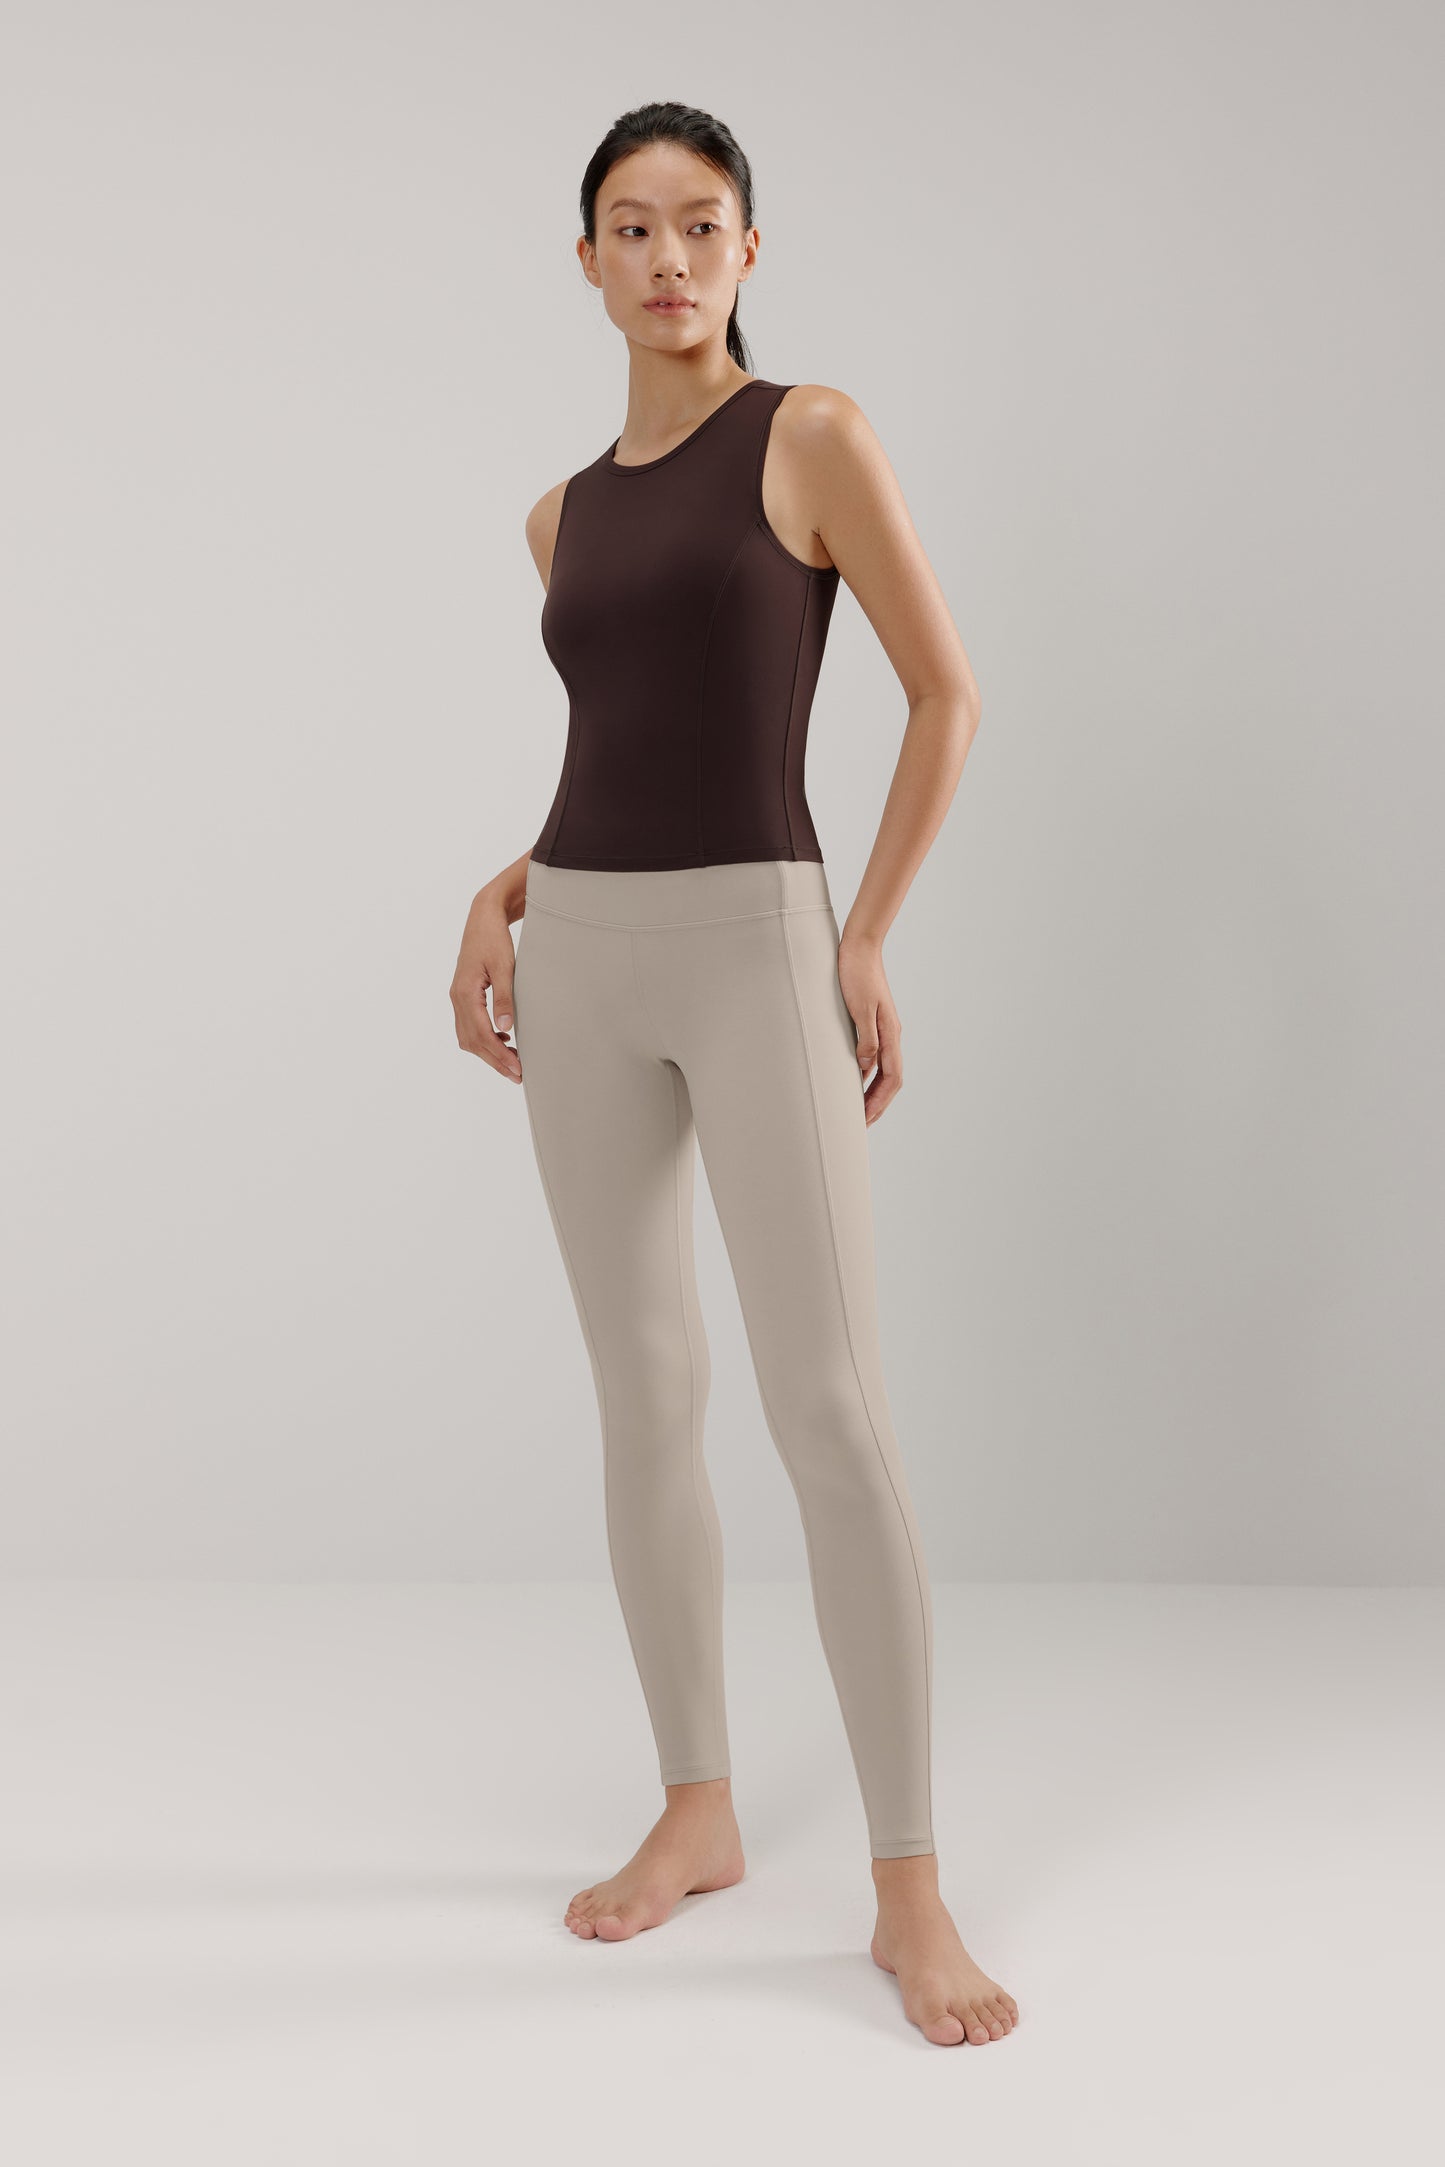 A woman wears a brown tank and cream leggings